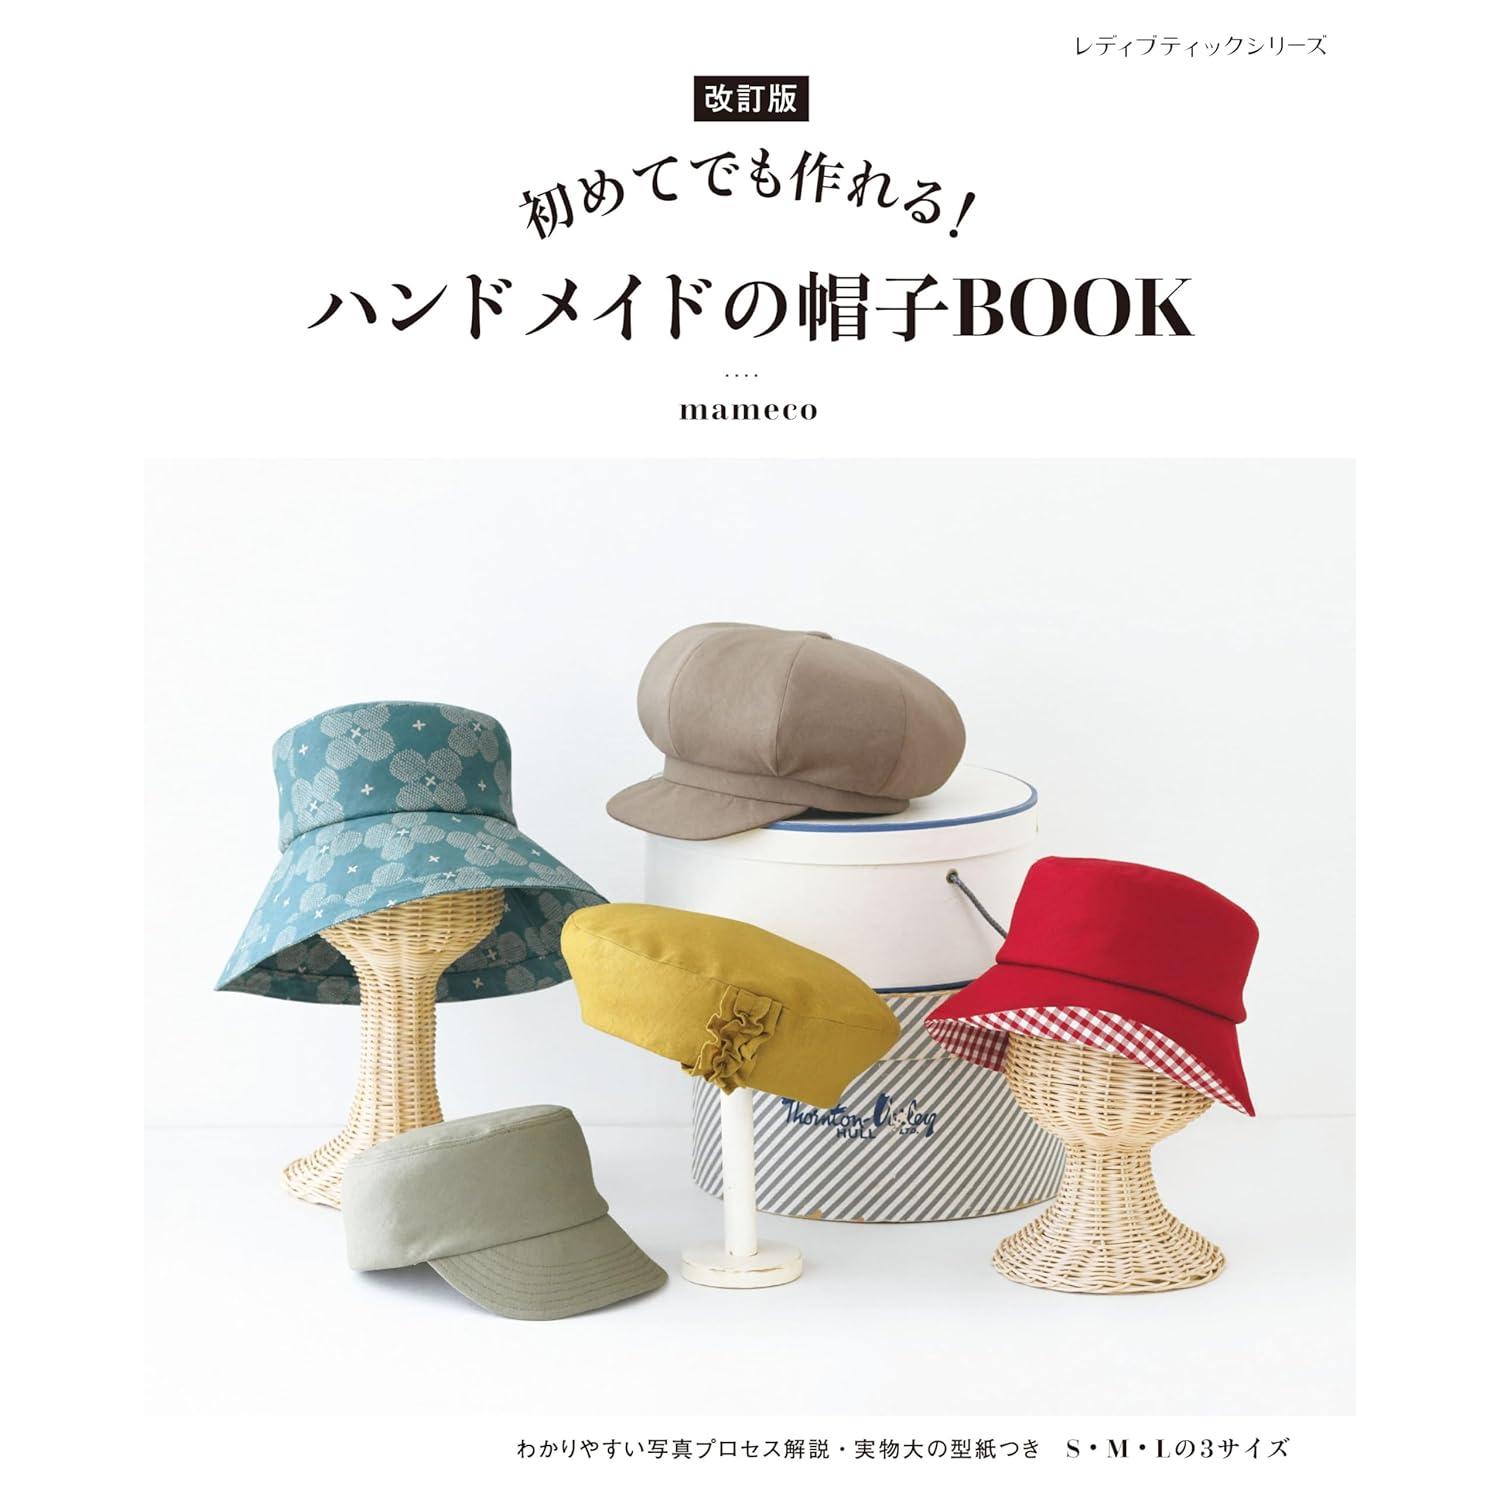 S8504 Revised) Handmade hat BOOK(book)